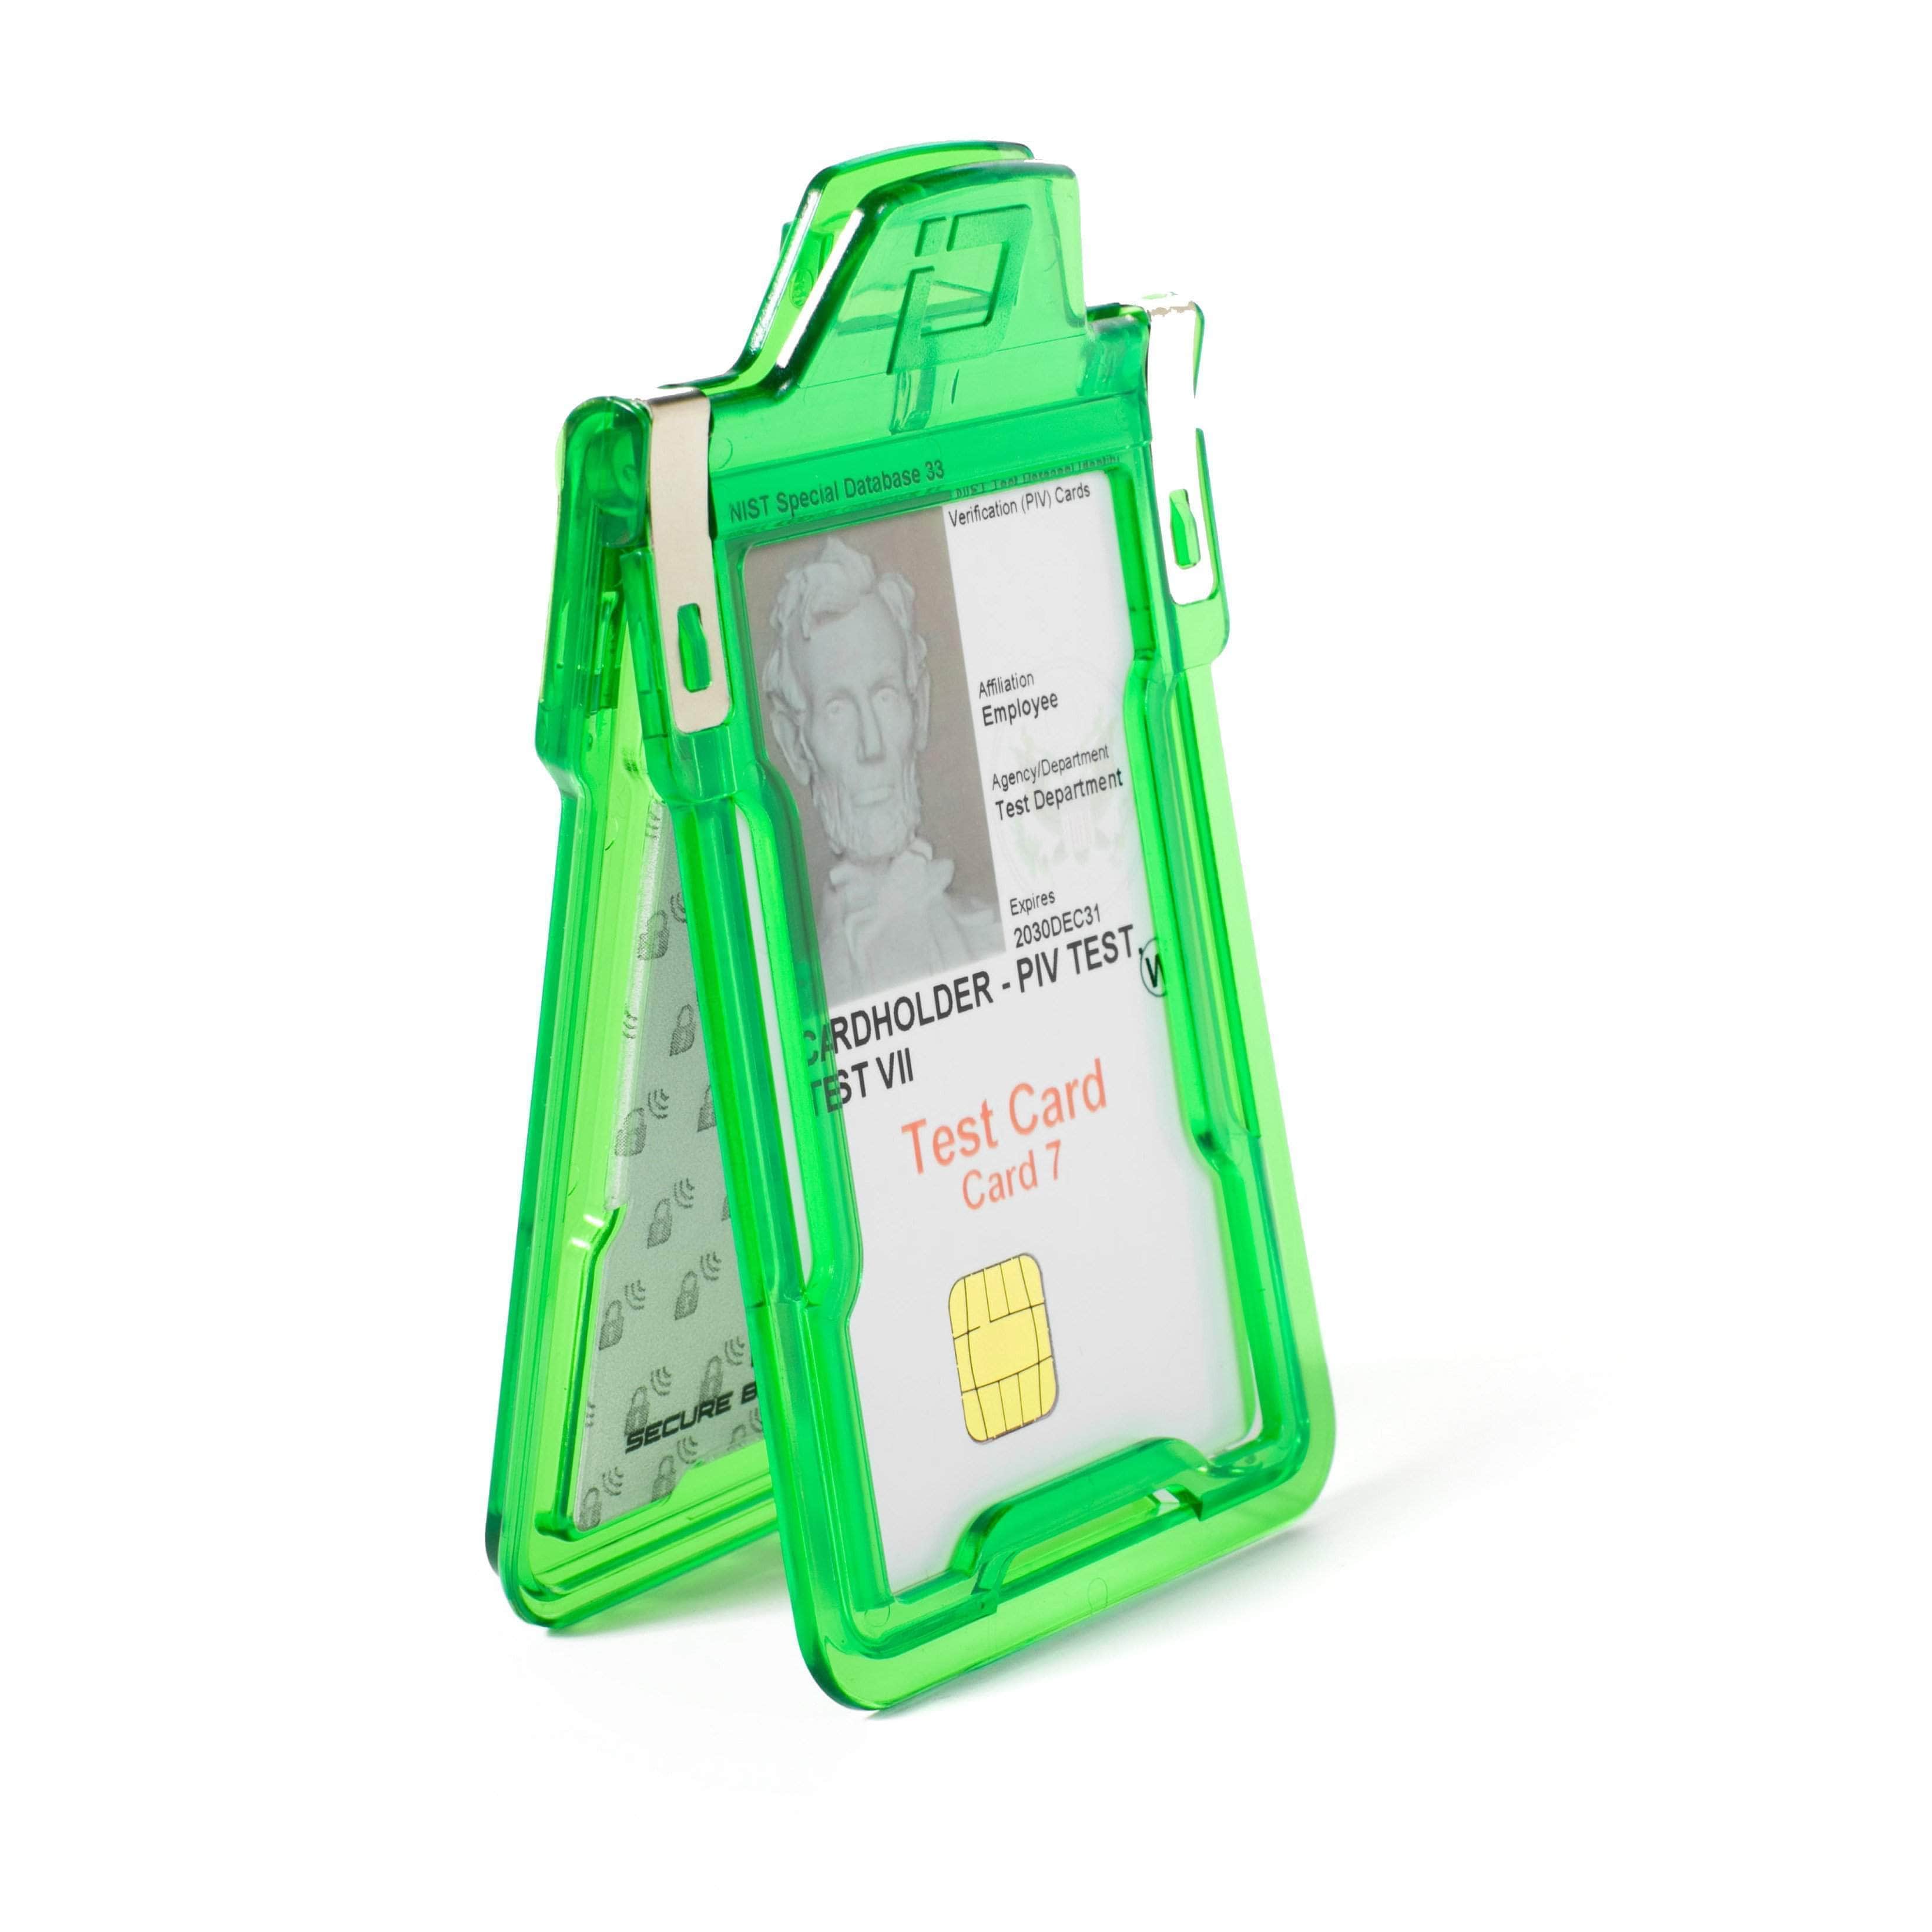 ID Stronghold Badgeholder BloxProx Green Secure Badge Holder with BloxProx™ - Protects 125Khz HID Prox 1 Card Holder